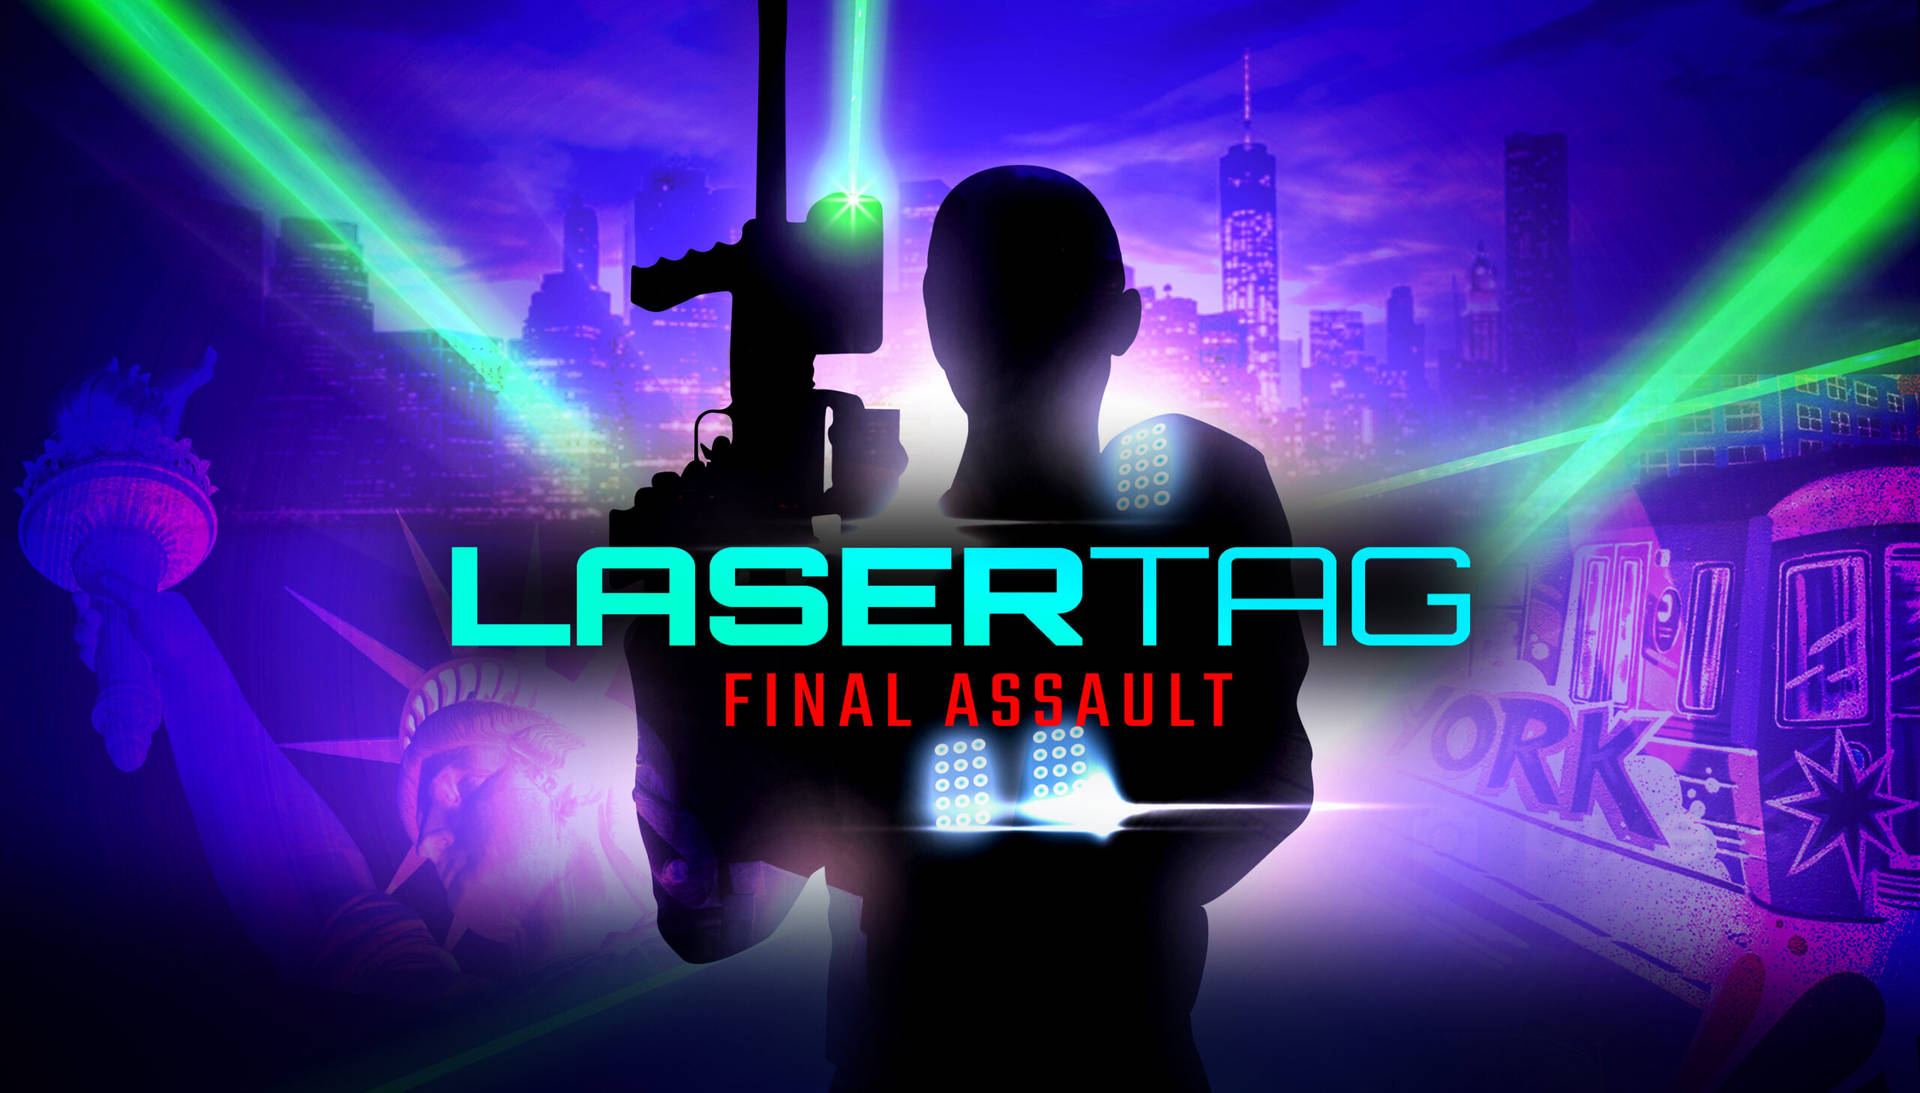 Lasertag Final Assault Can Be Translated To Italian As 